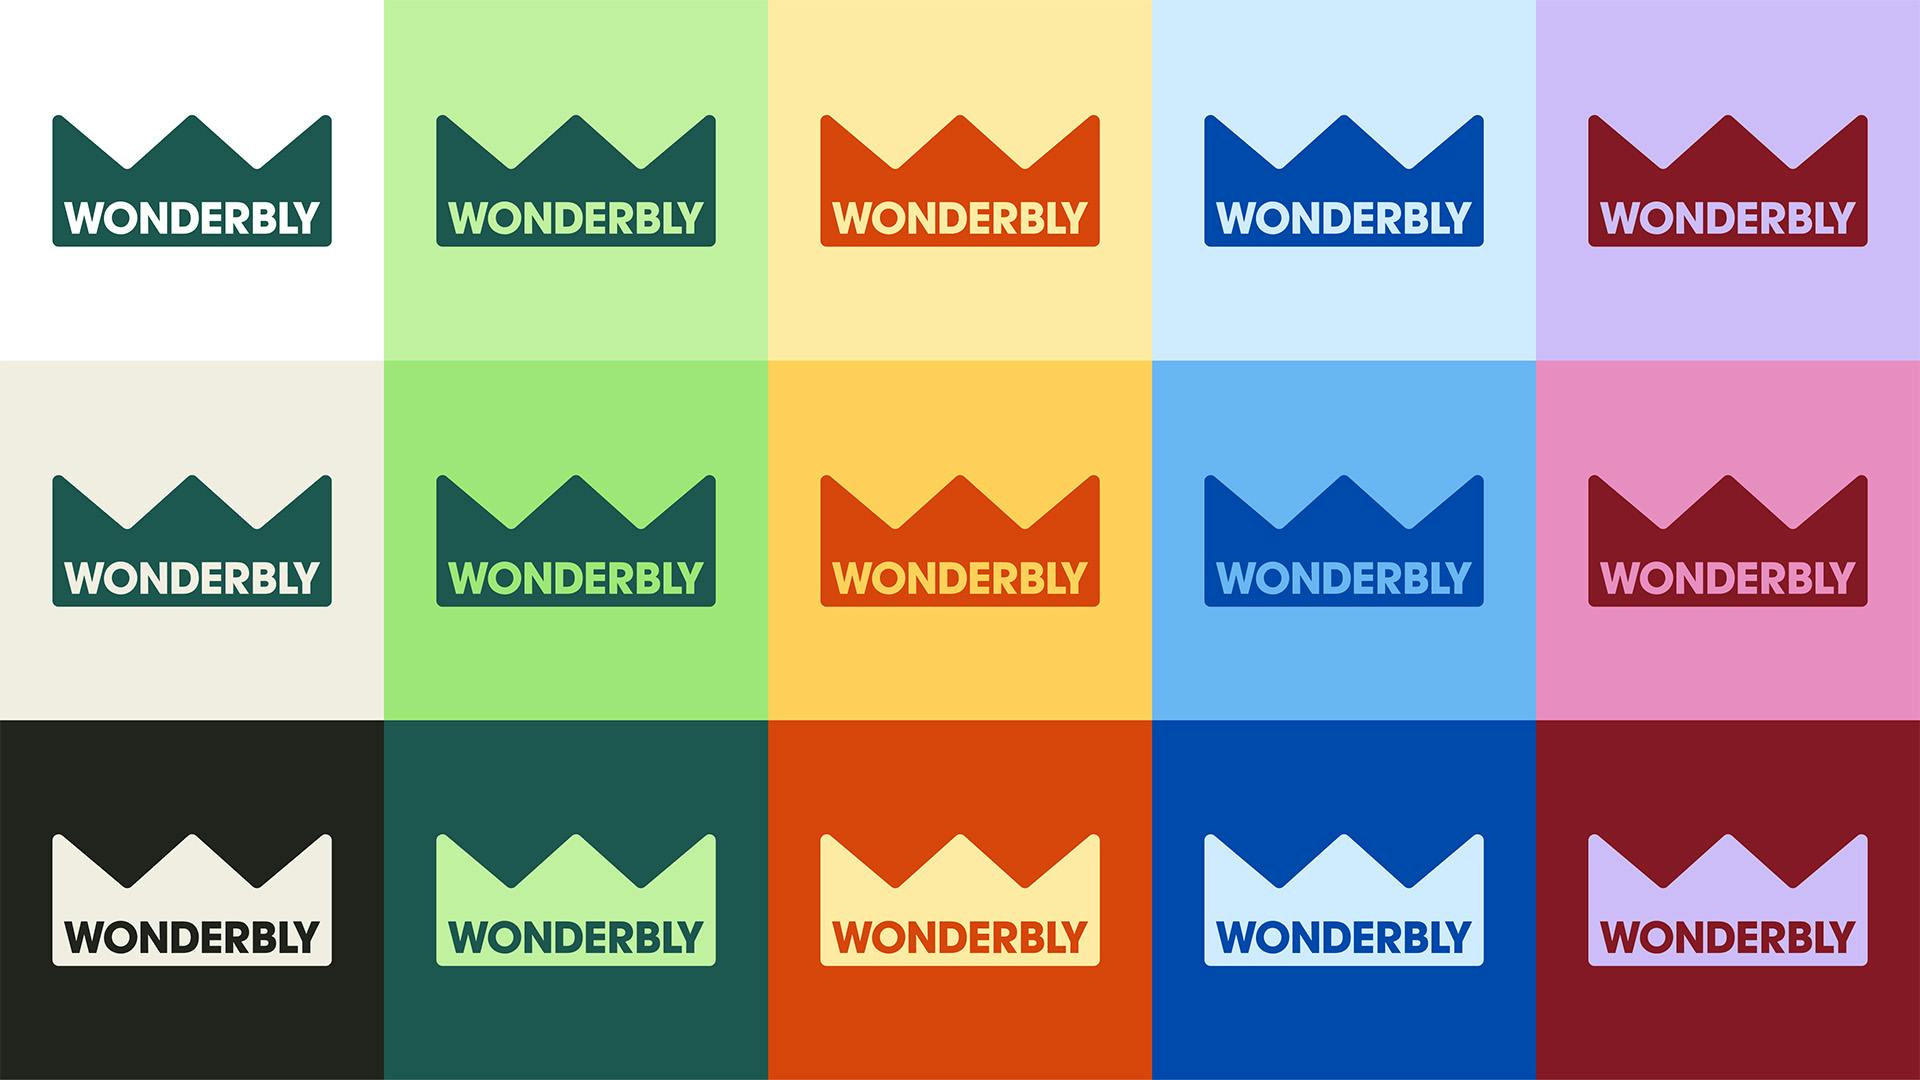 Graphic showing different coloured executions of Wonderbly's logo, a crown shape with the brand name inside